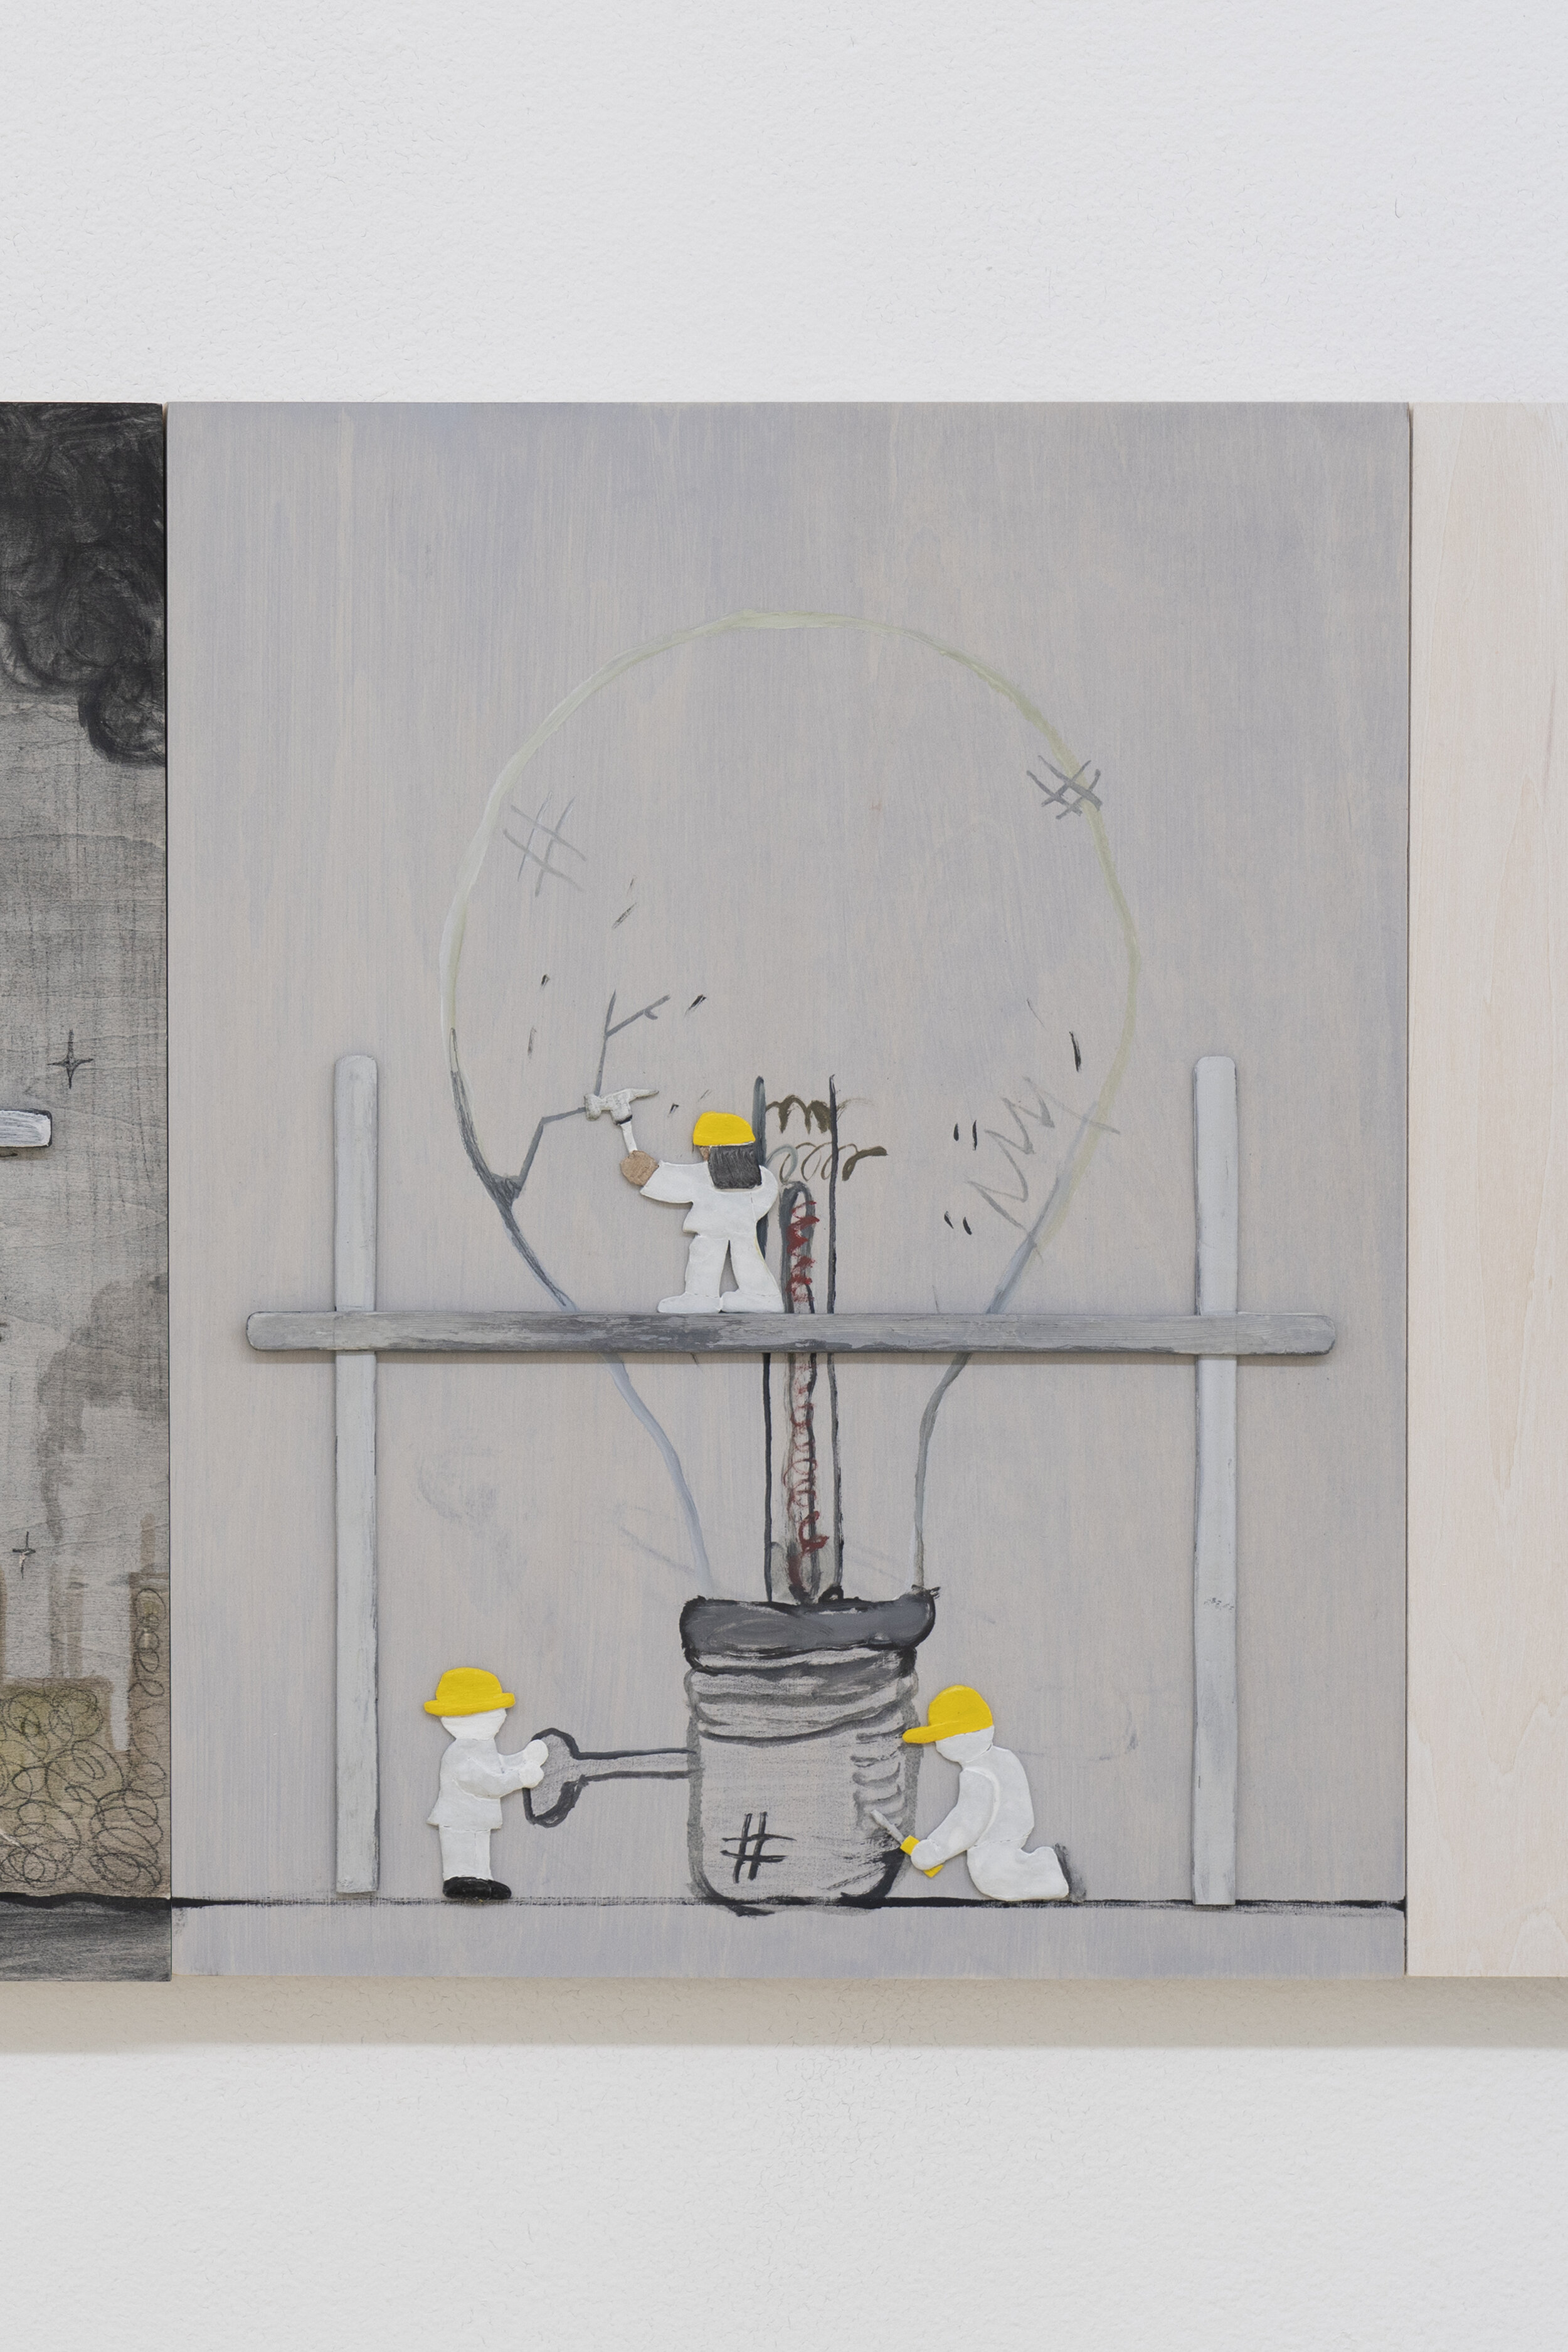  Dennis Witkin  Repairing Bulb,  2020 Oil paint, acrylic paint, cal-tint, wood-stain, epoxy clay, polymer clay on panel 14 x 11 inches 